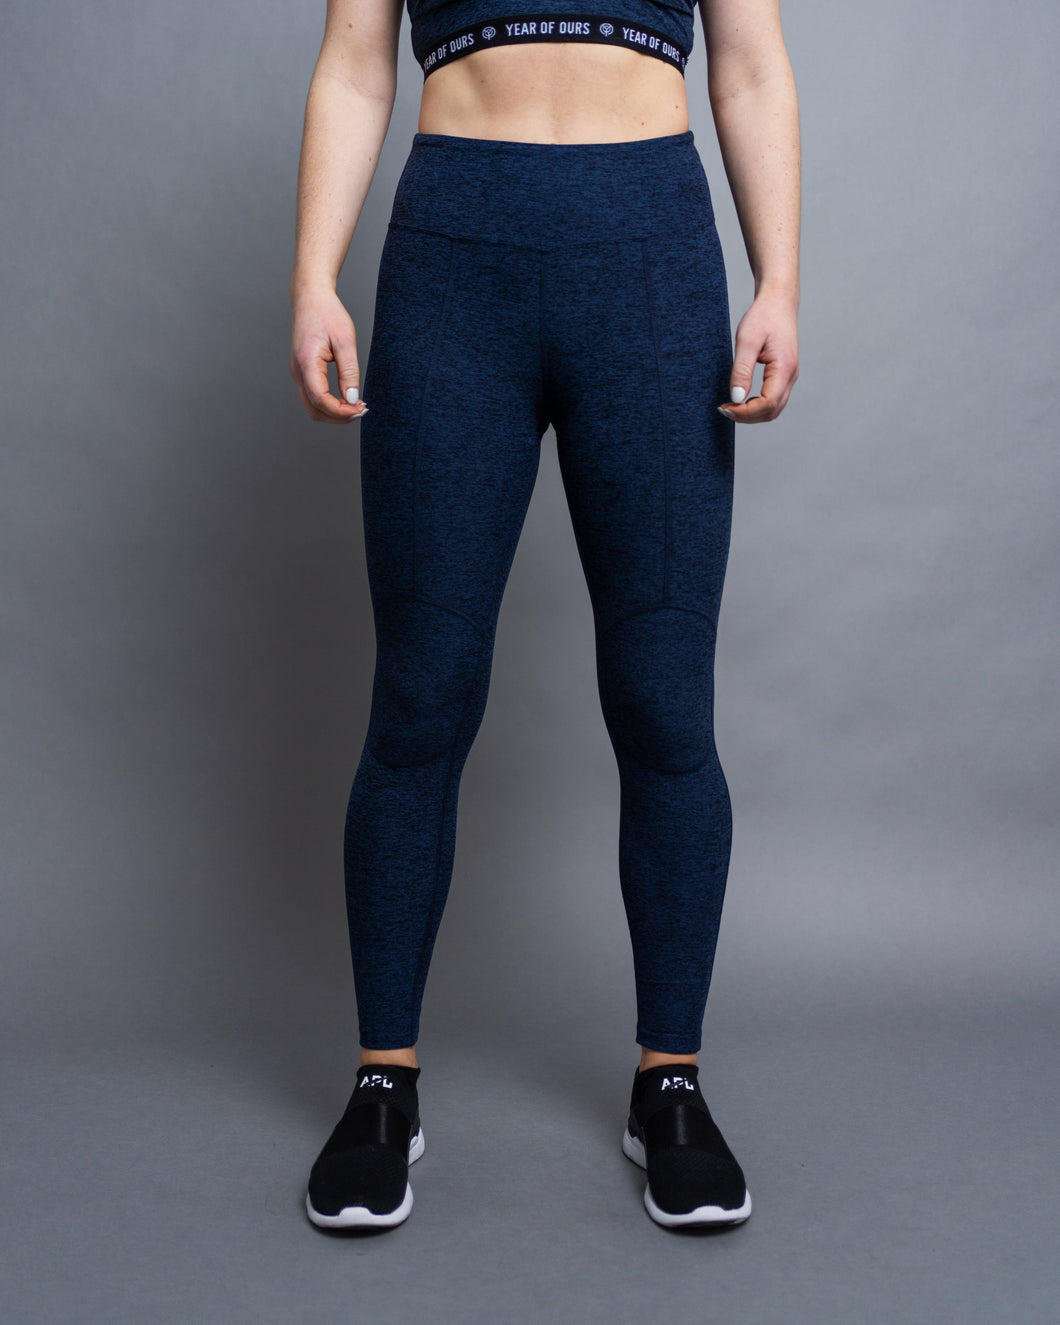 Year Of Ours Stretch Track Leggings - Navy